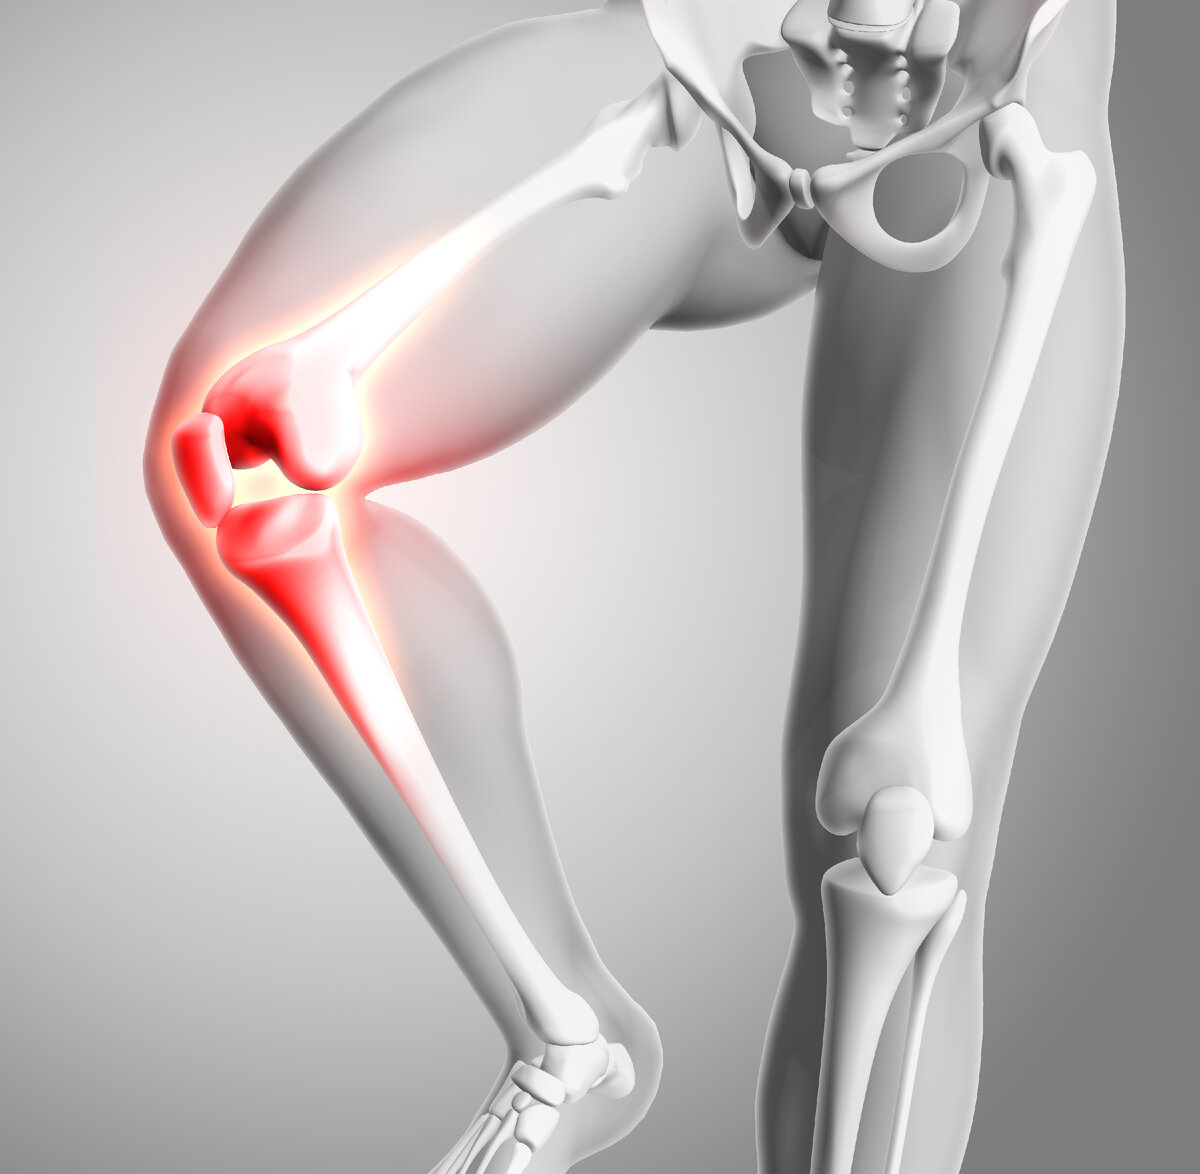 <a href="https://ru.freepik.com/free-photo/3d-render-of-a-medical-figure-with-close-up-of-knee-and-glowing-bones_9510521.htm#query=%D0%B0%D1%80%D1%82%D1%80%D0%BE%D0%B7&position=14&from_view=search&track=sph&uuid=5631a112-8815-4040-87a4-0f13d0f4fa93">Изображение от kjpargeter</a> на Freepik